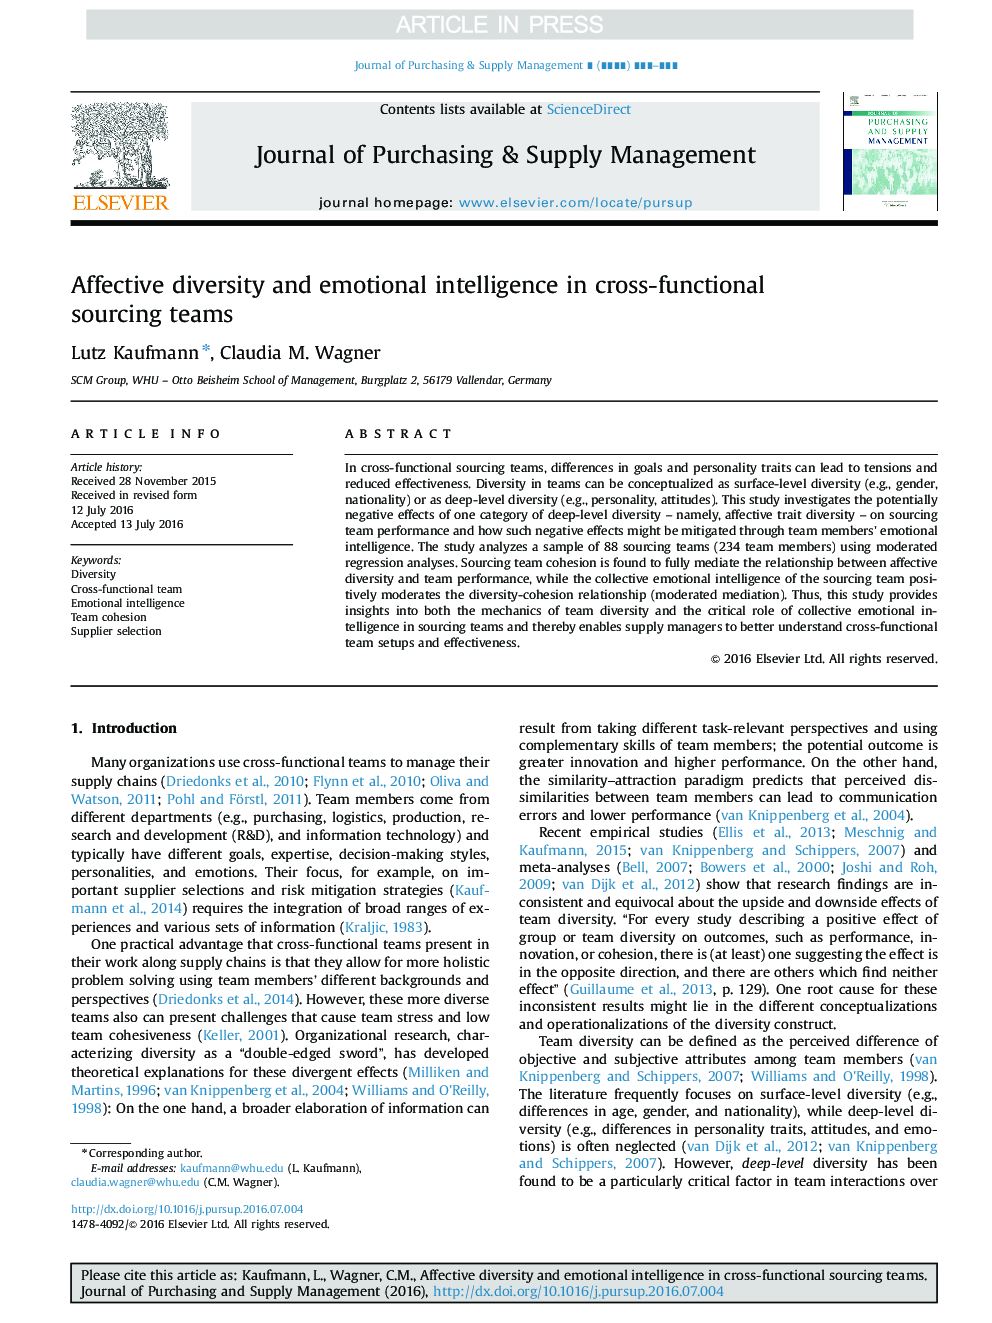 Affective diversity and emotional intelligence in cross-functional sourcing teams